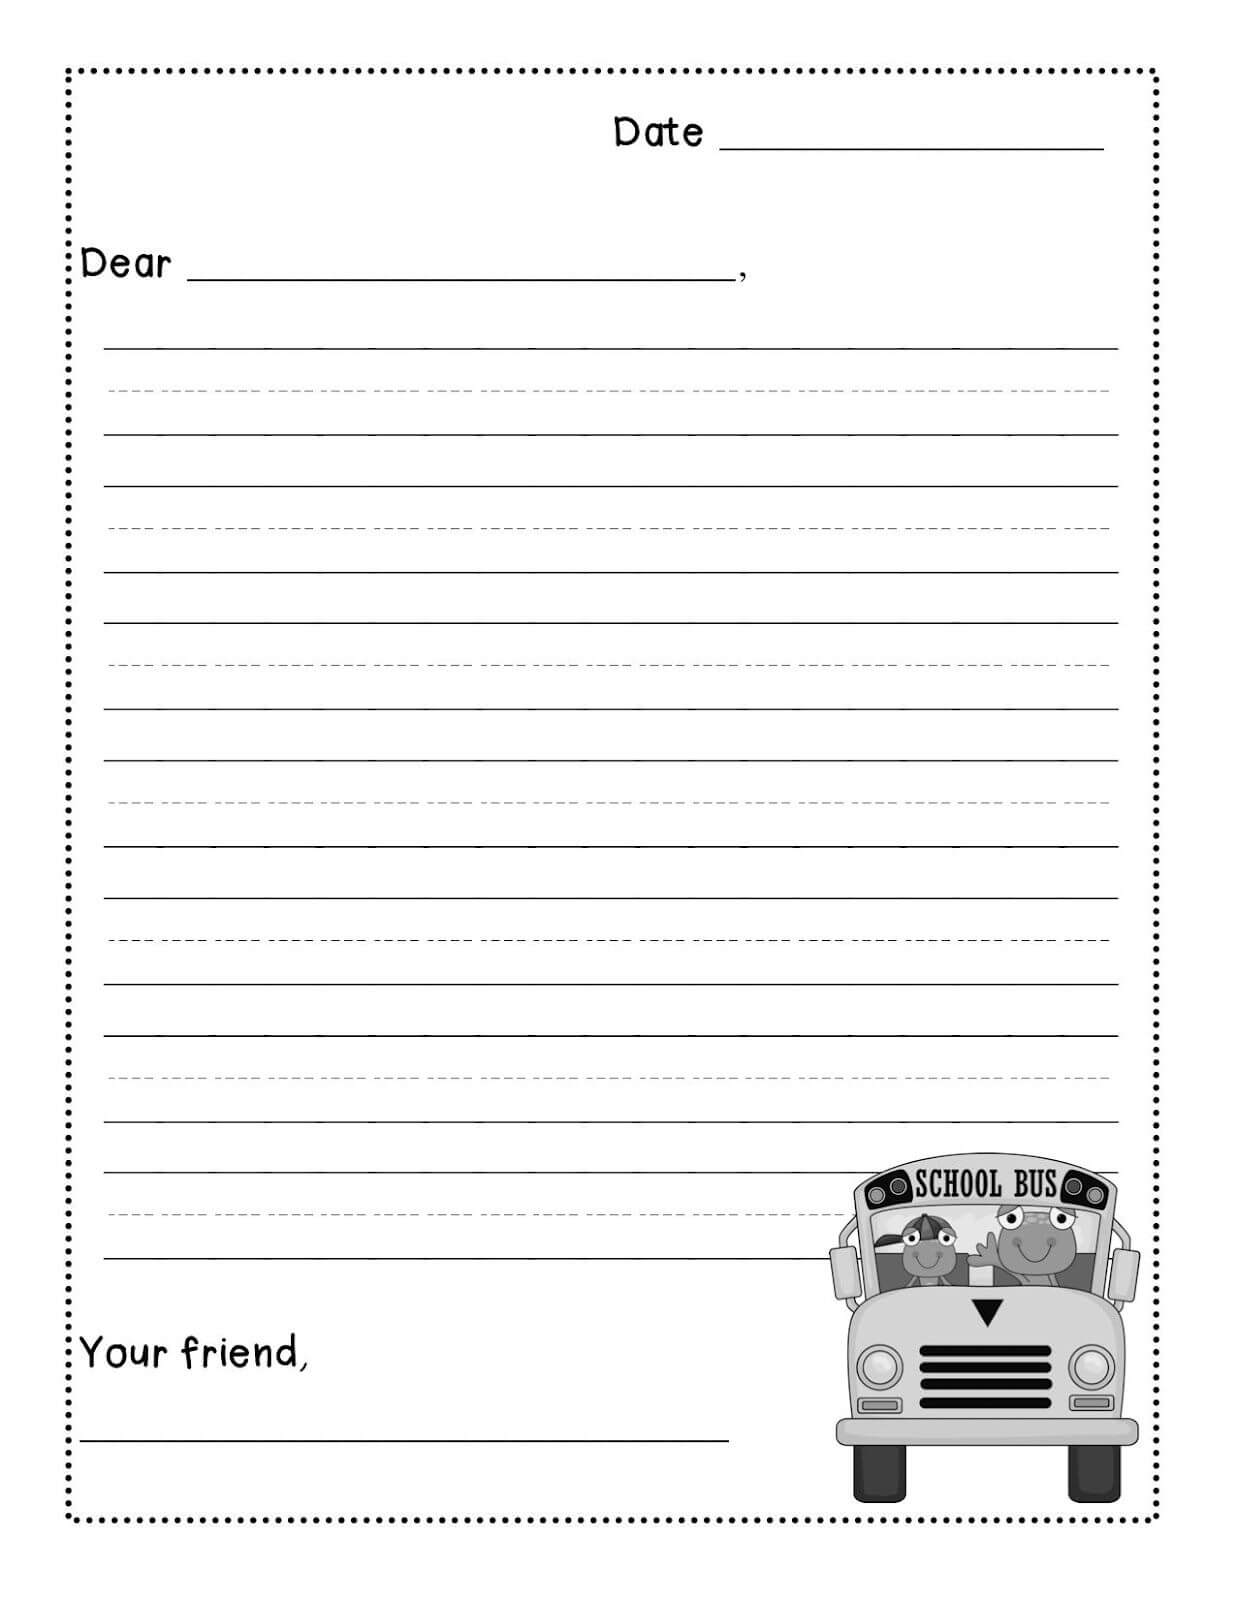 Friendly Letter Writing Freebie – Levelized Templates Up For Regarding Blank Letter Writing Template For Kids